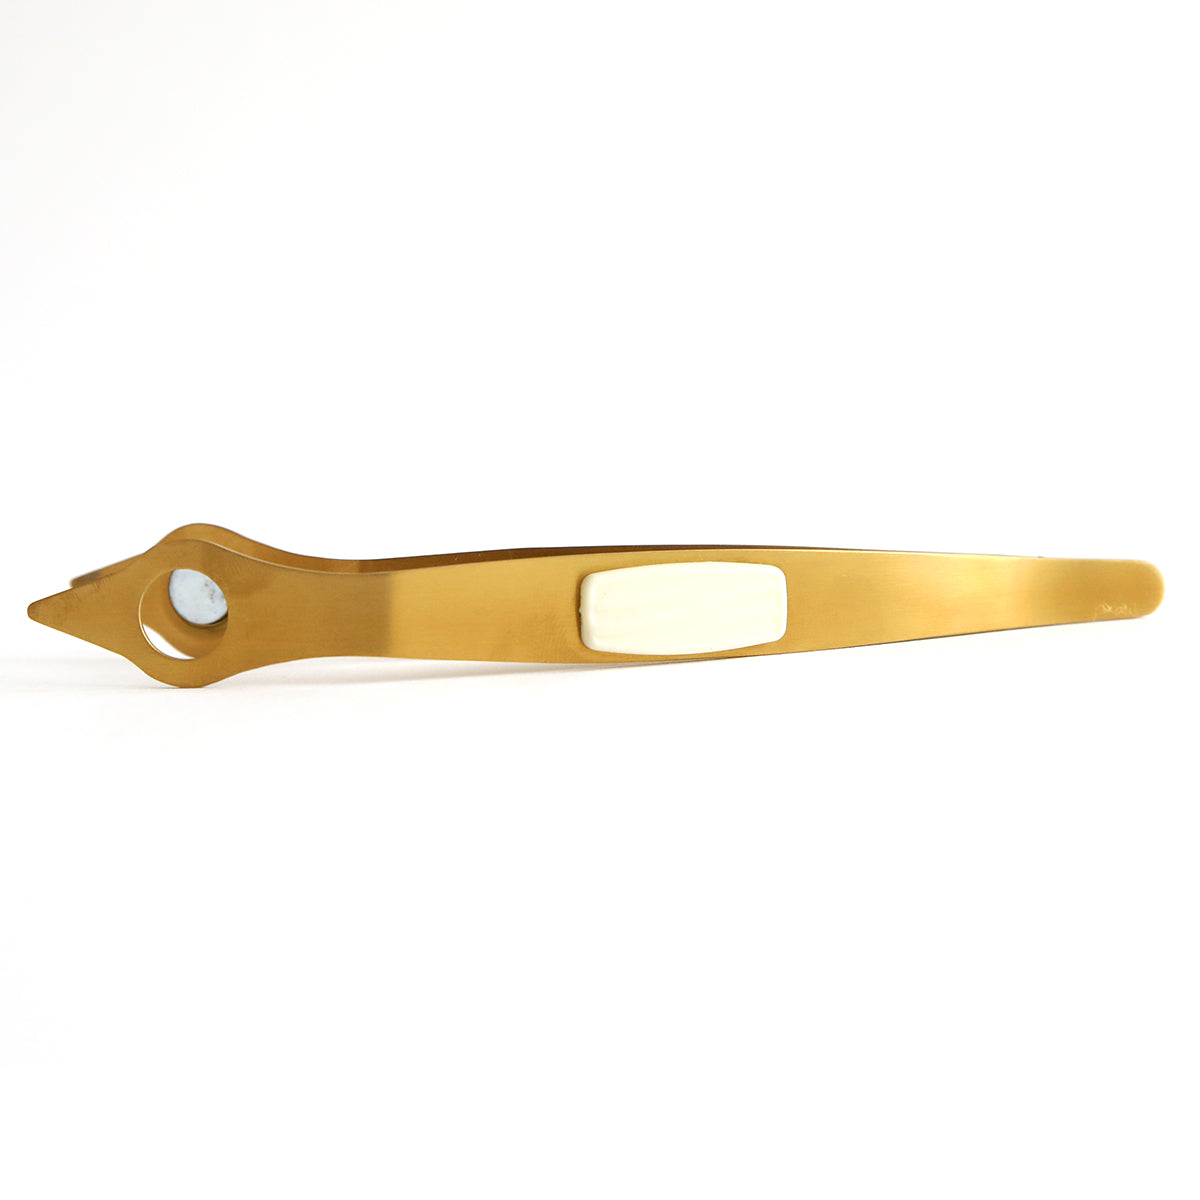 A Magnetic Tweezers on a white background.